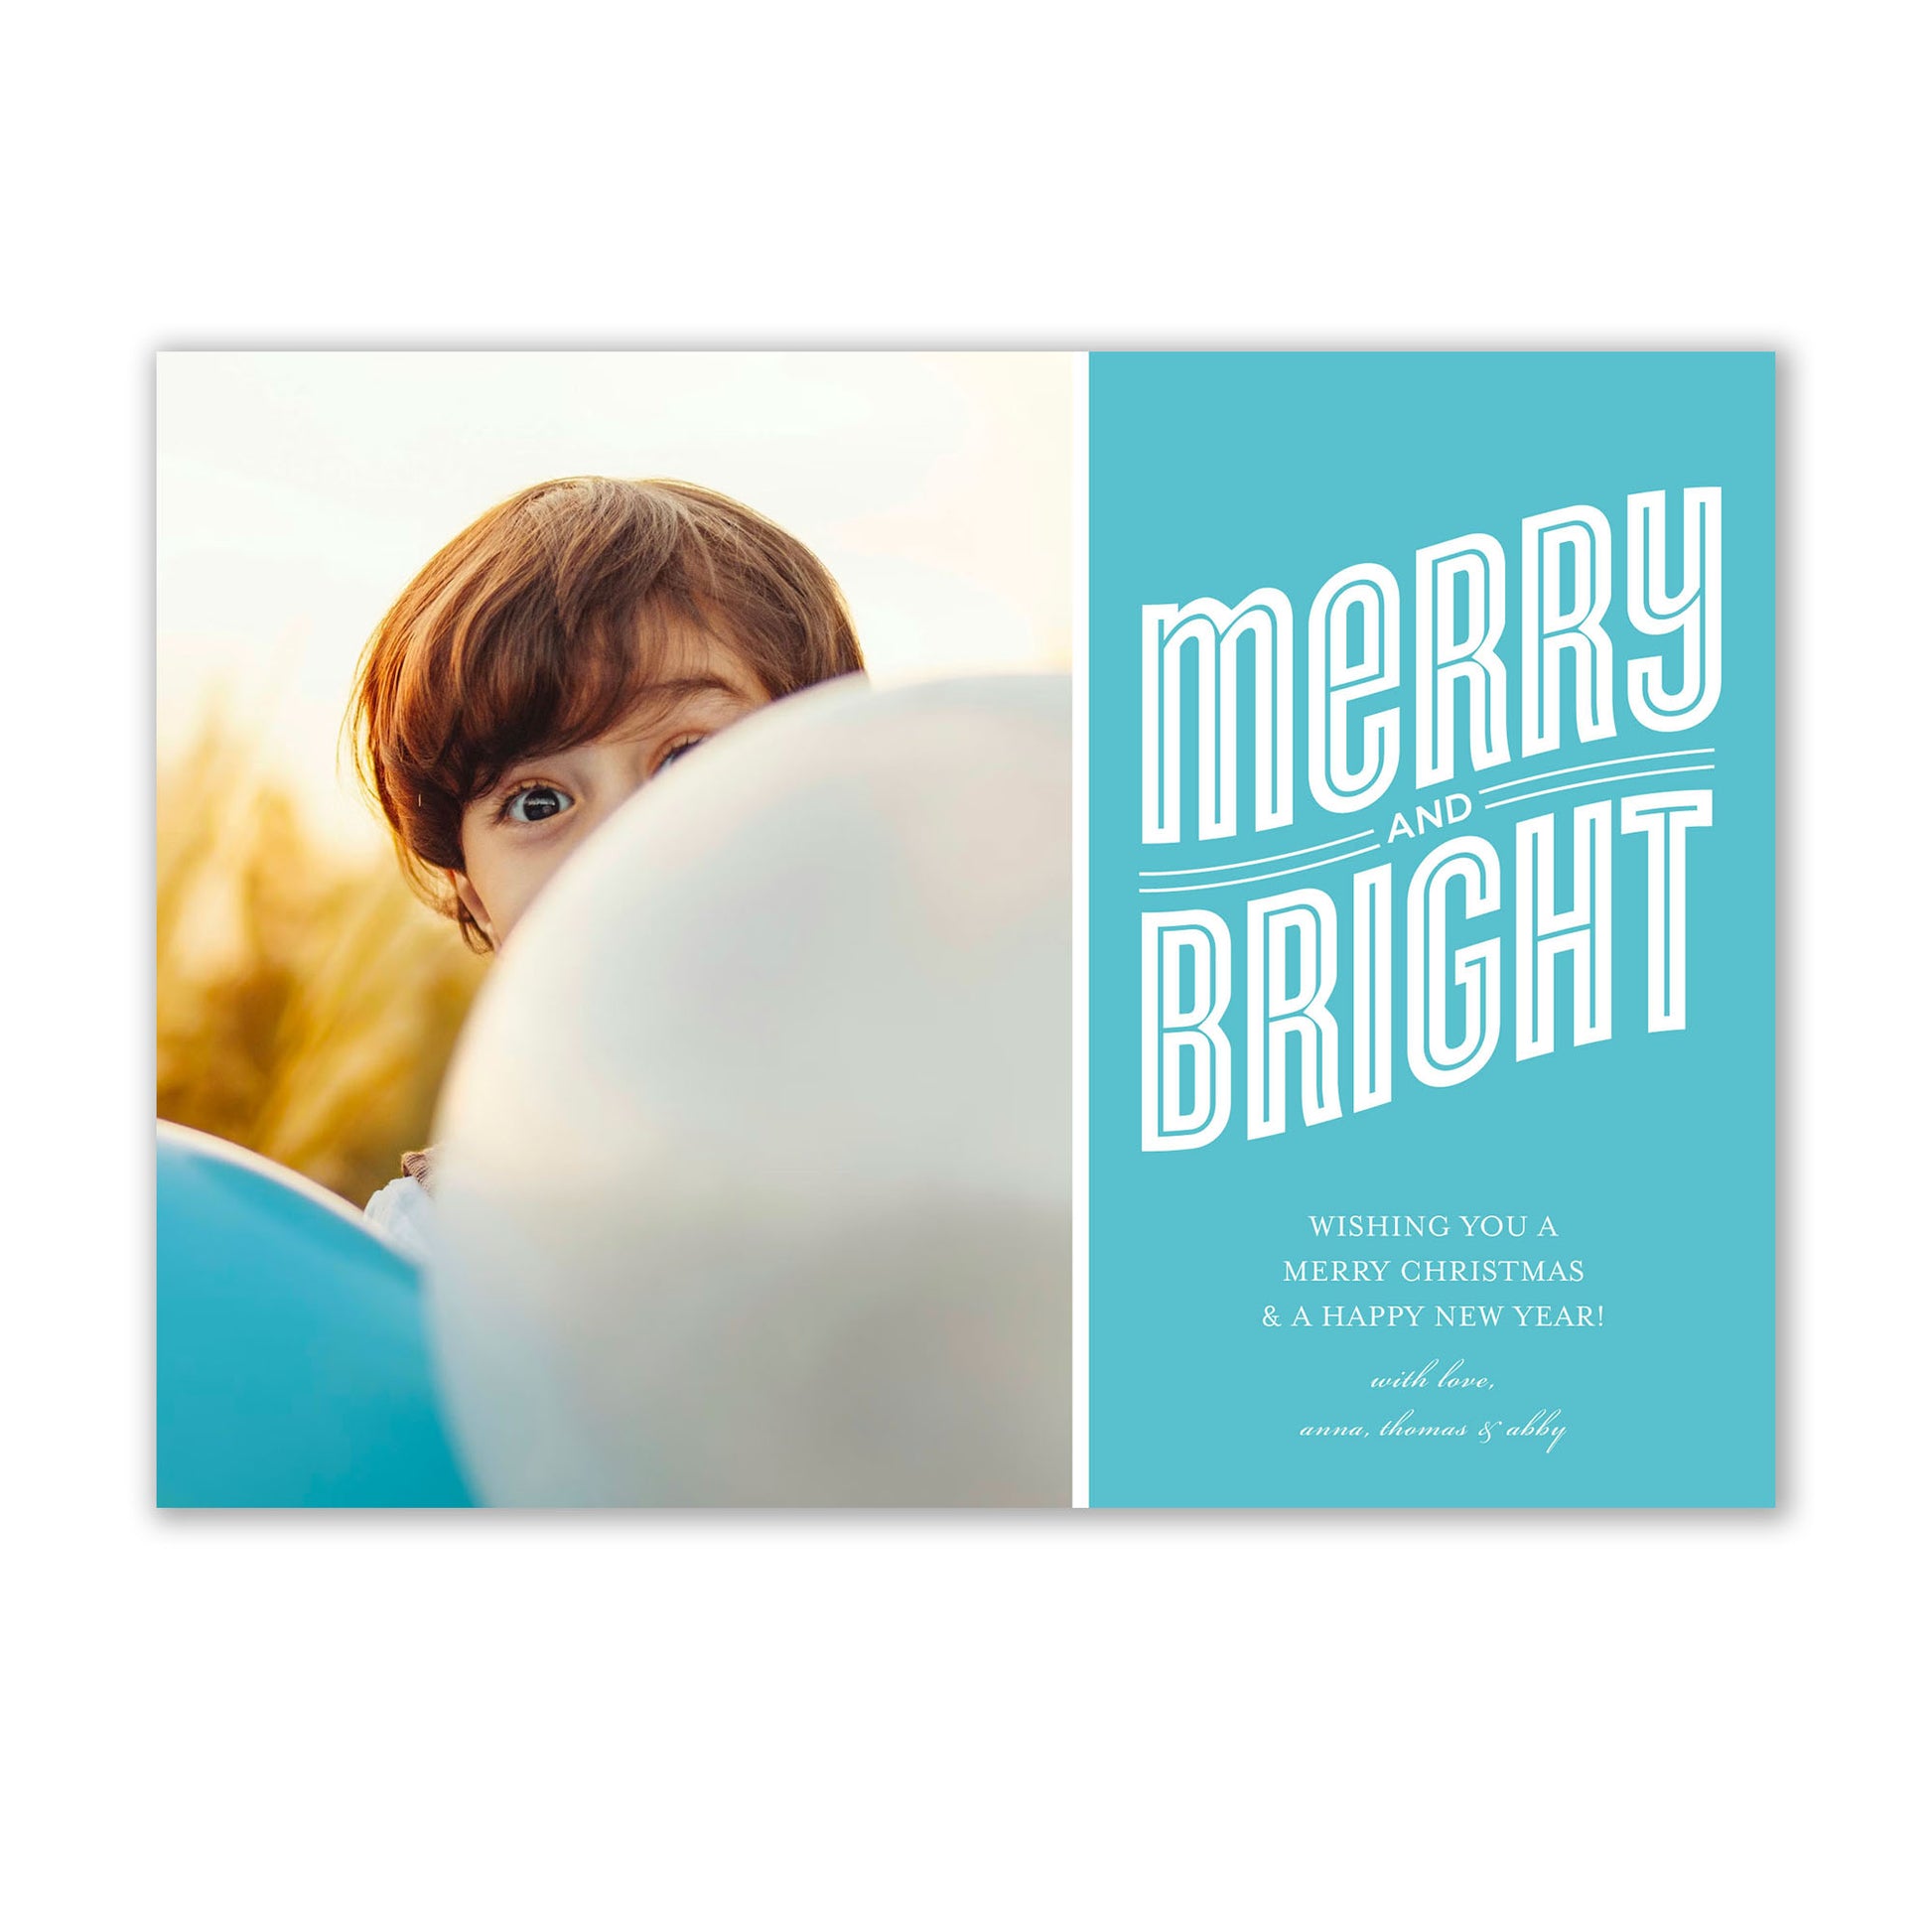 Celebrate the holiday season with our Blue Merry & Bright holiday photo card from Noteworthy. Each card includes a beautiful design that will bring joy and cheer to your loved ones. These cards come with white unlined envelopes for easy mailing.